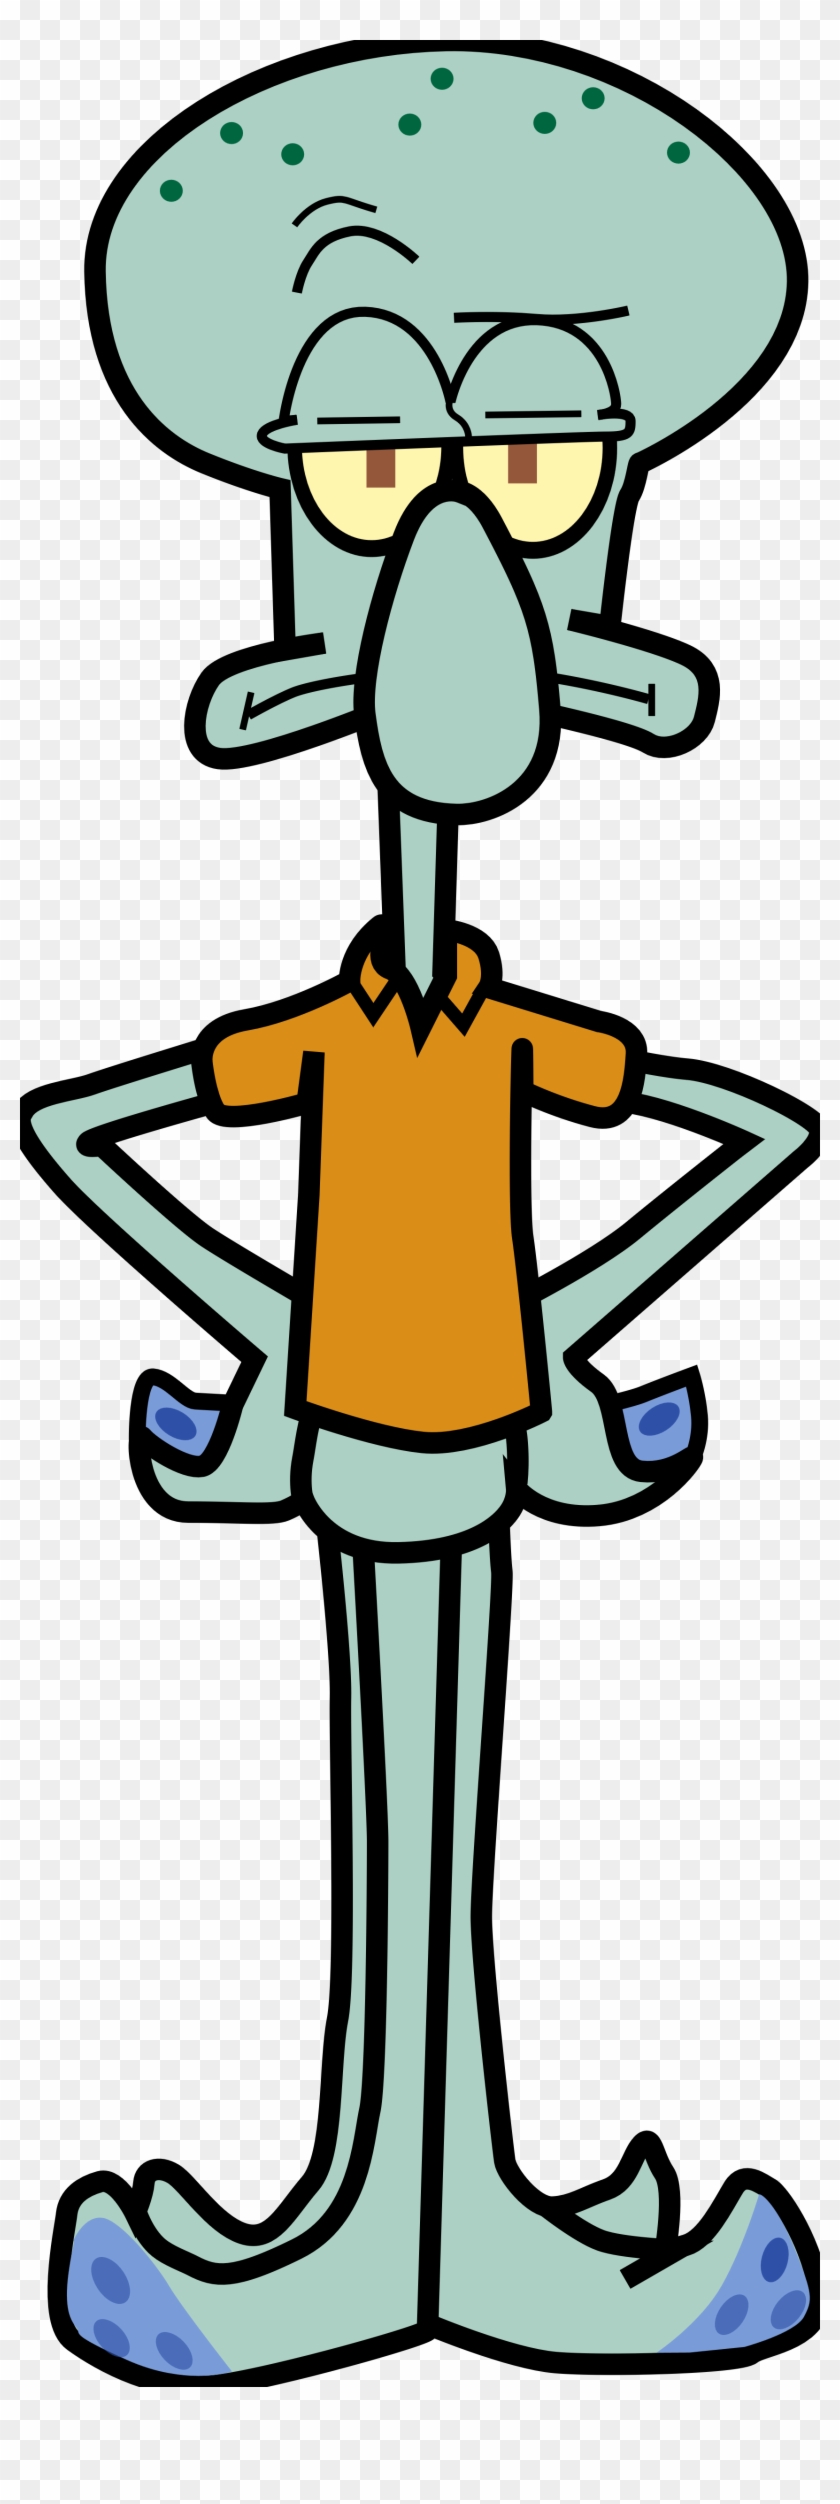 Squidward Tentacles Picture - Squidward From Spongebob Clipart #224813